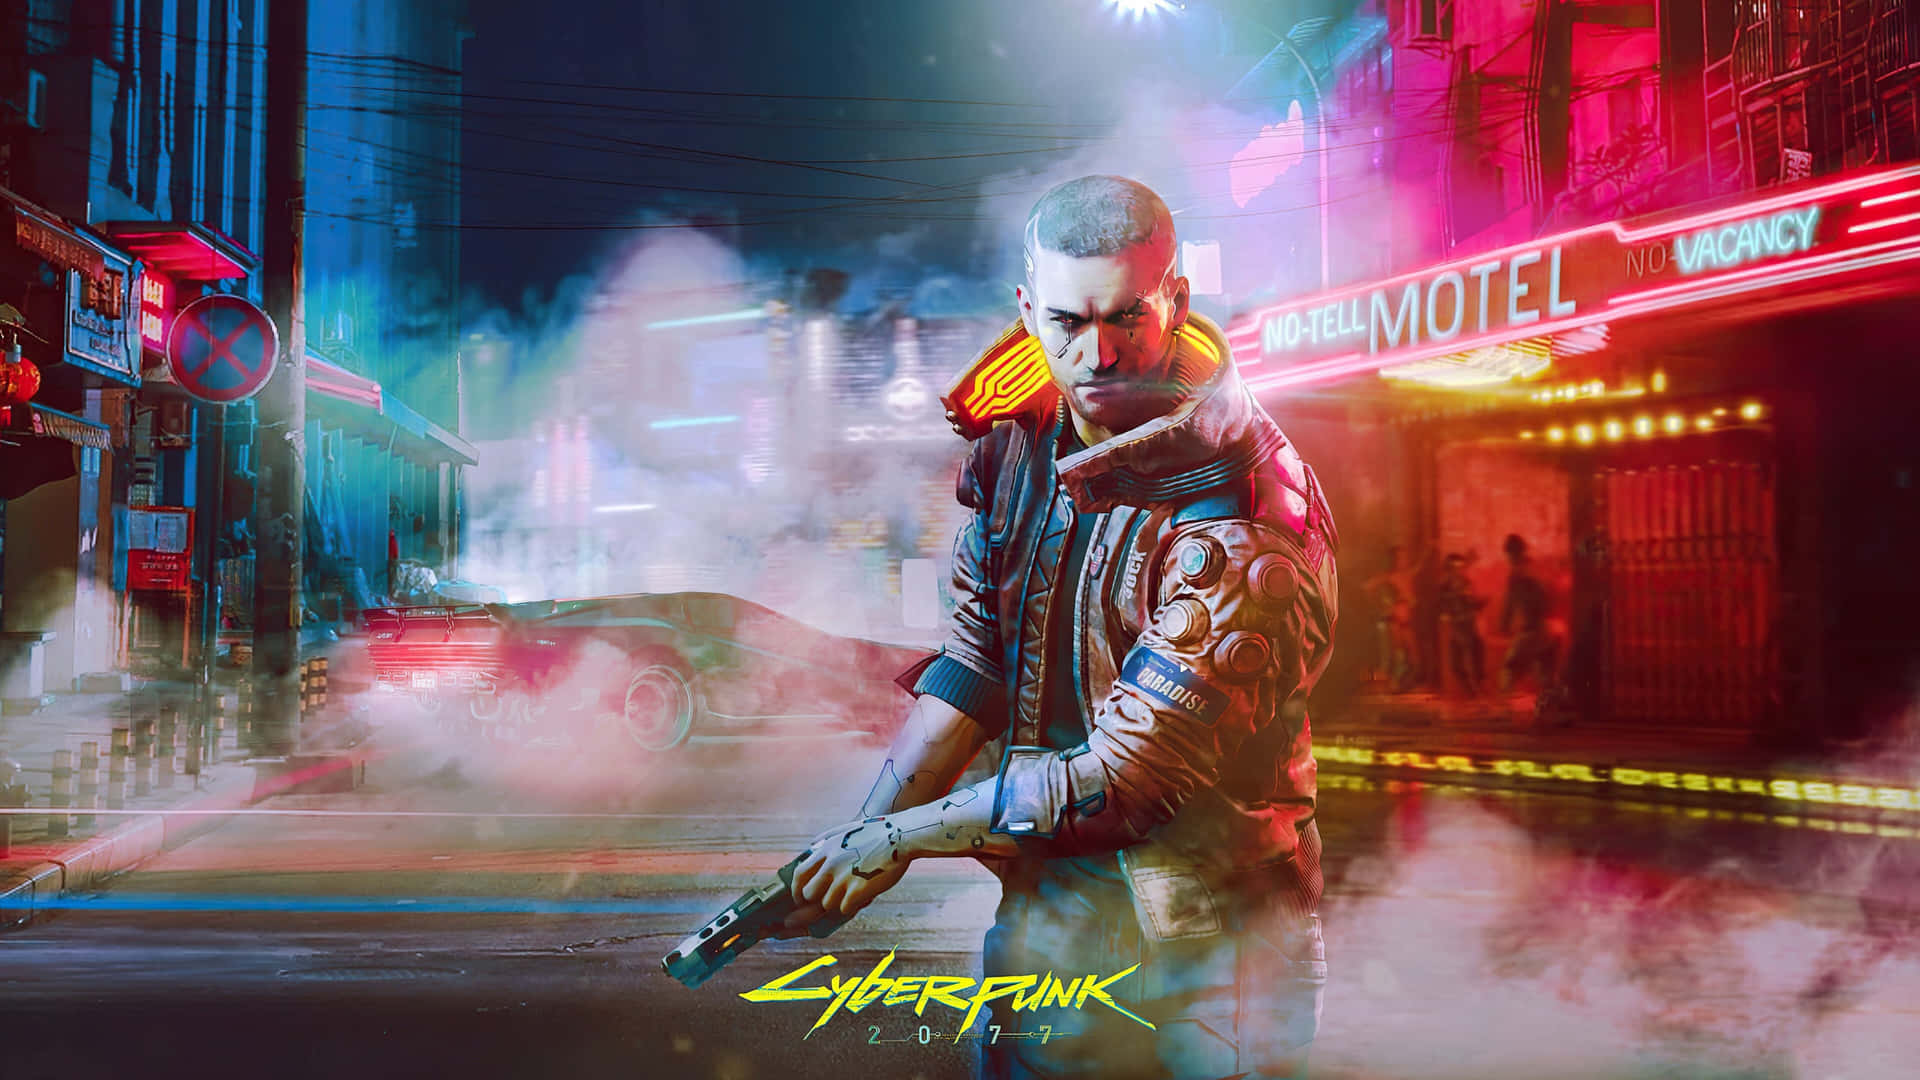 Welcome To The Cyberpunk World! Background